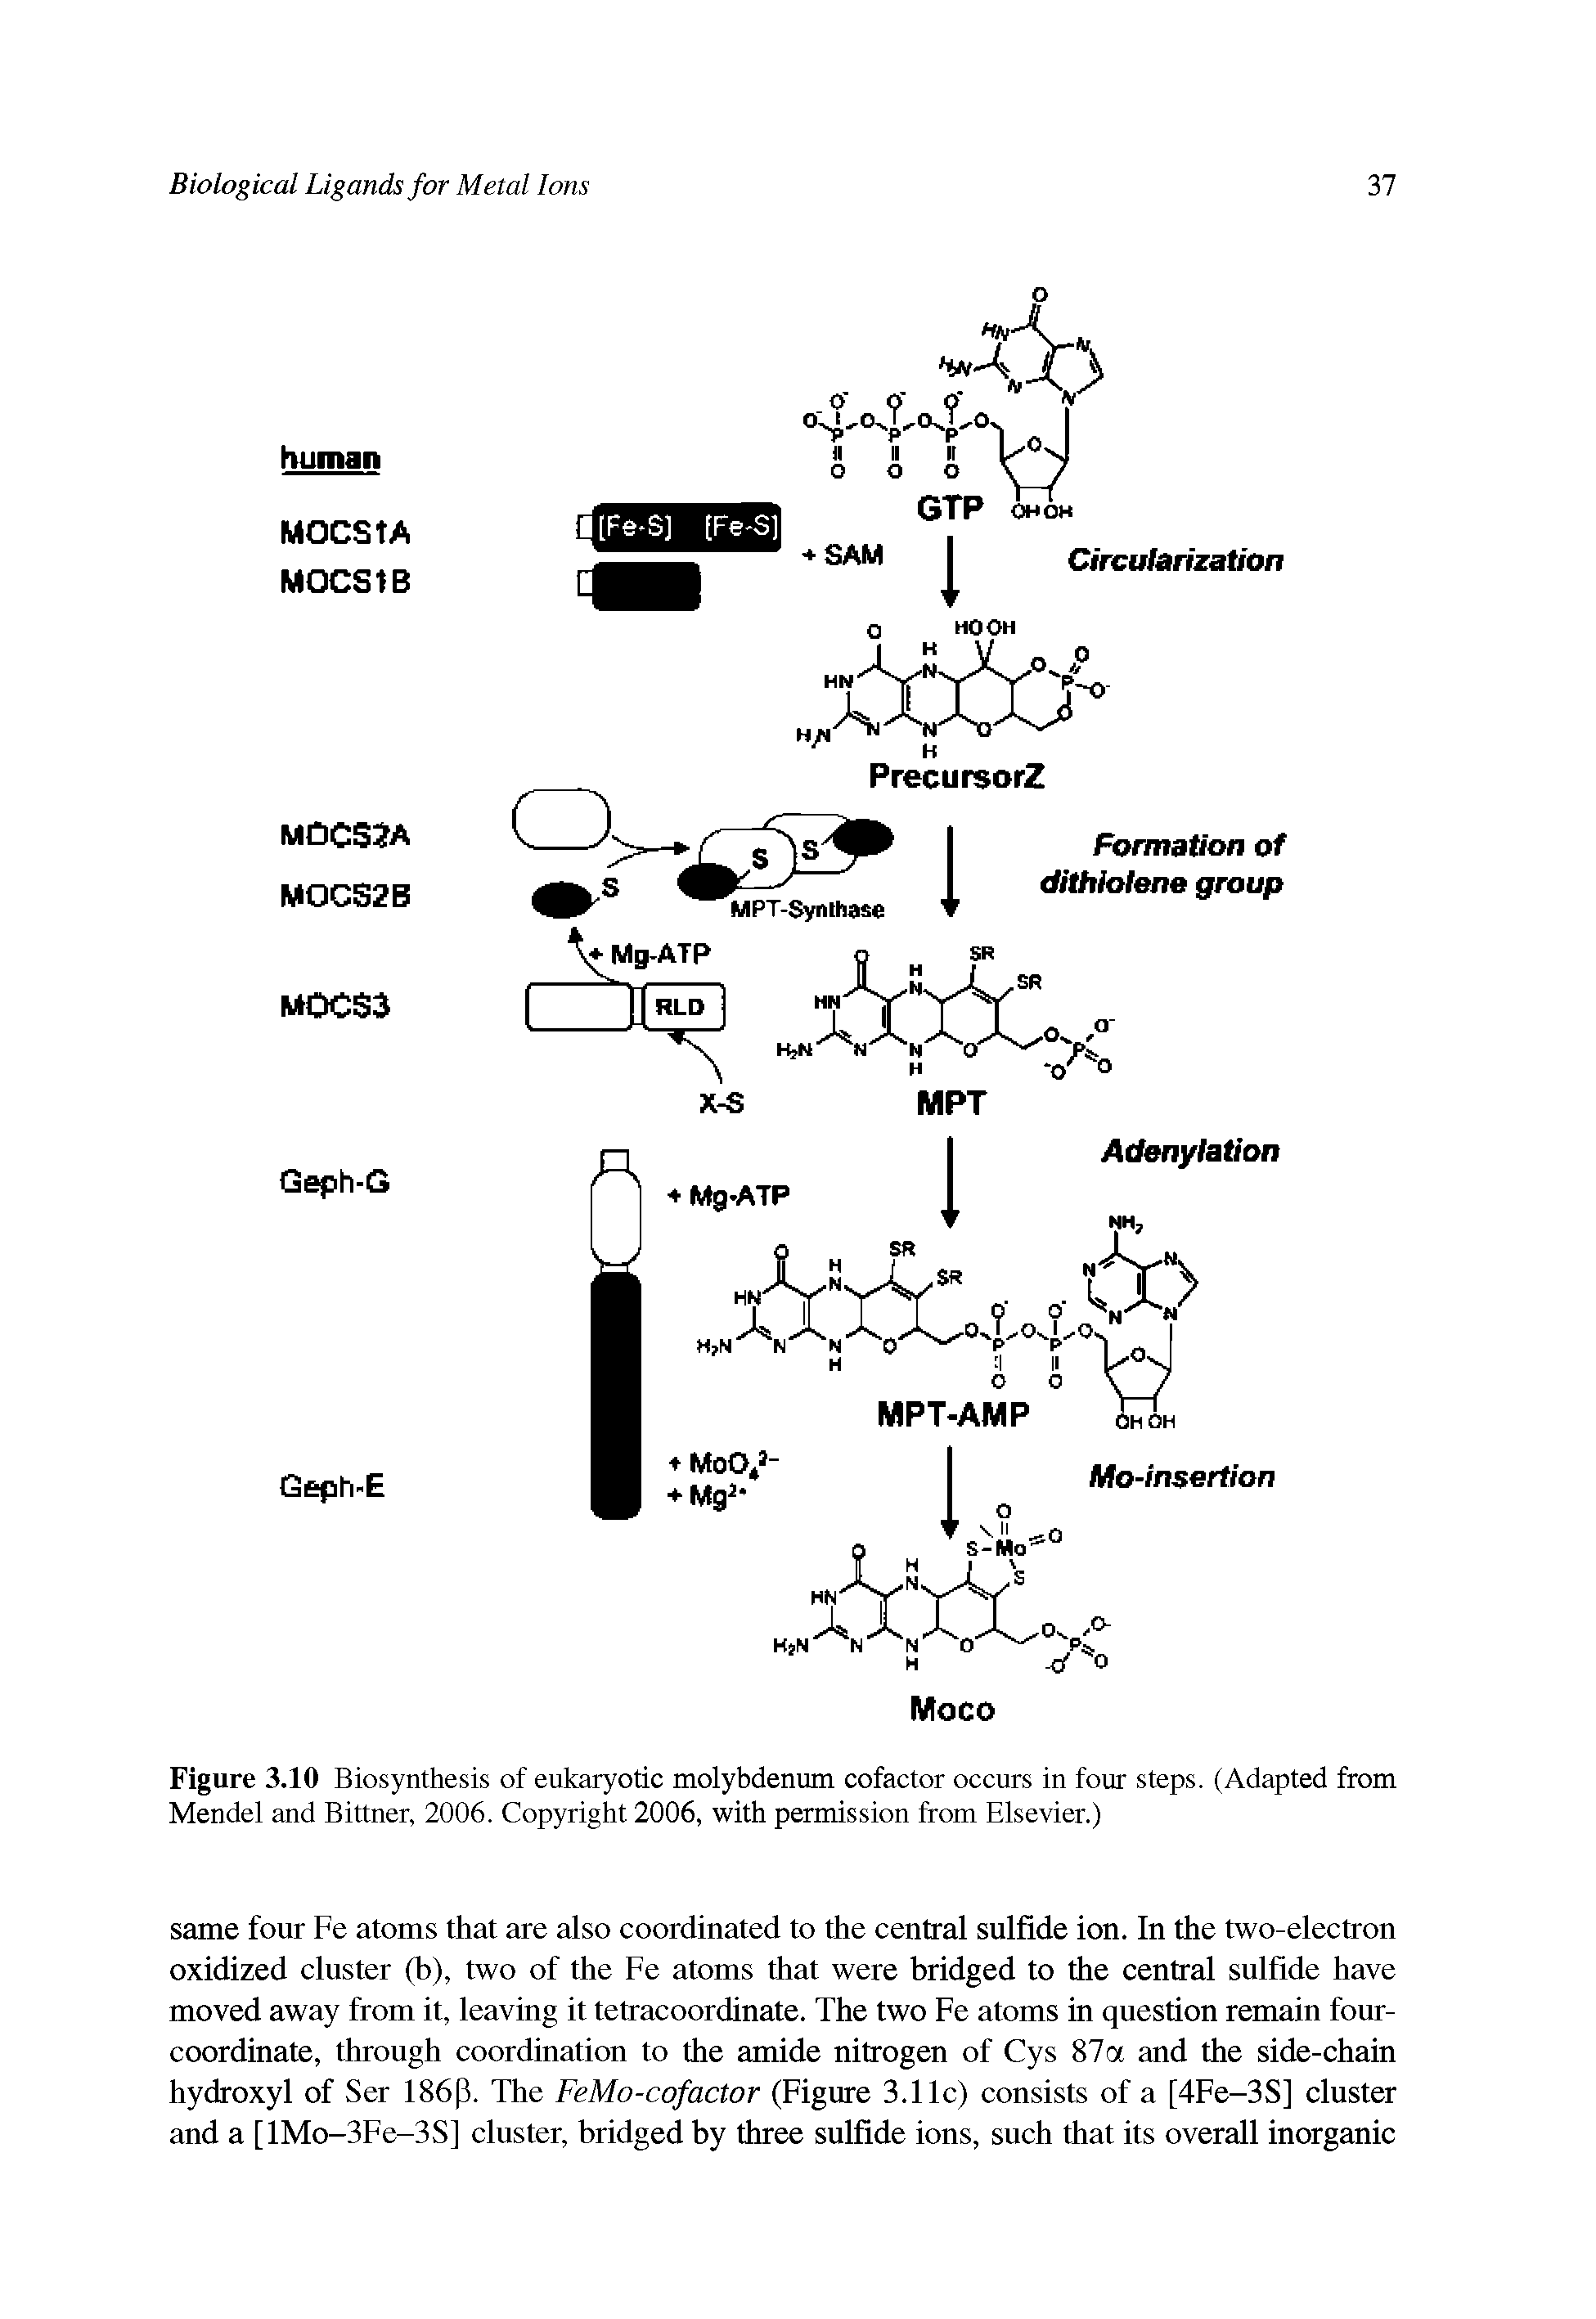 Figure 3.10 Biosynthesis of eukaryotic molybdenum cofactor occurs in four steps. (Adapted from Mendel and Bittner, 2006. Copyright 2006, with permission from Elsevier.)...